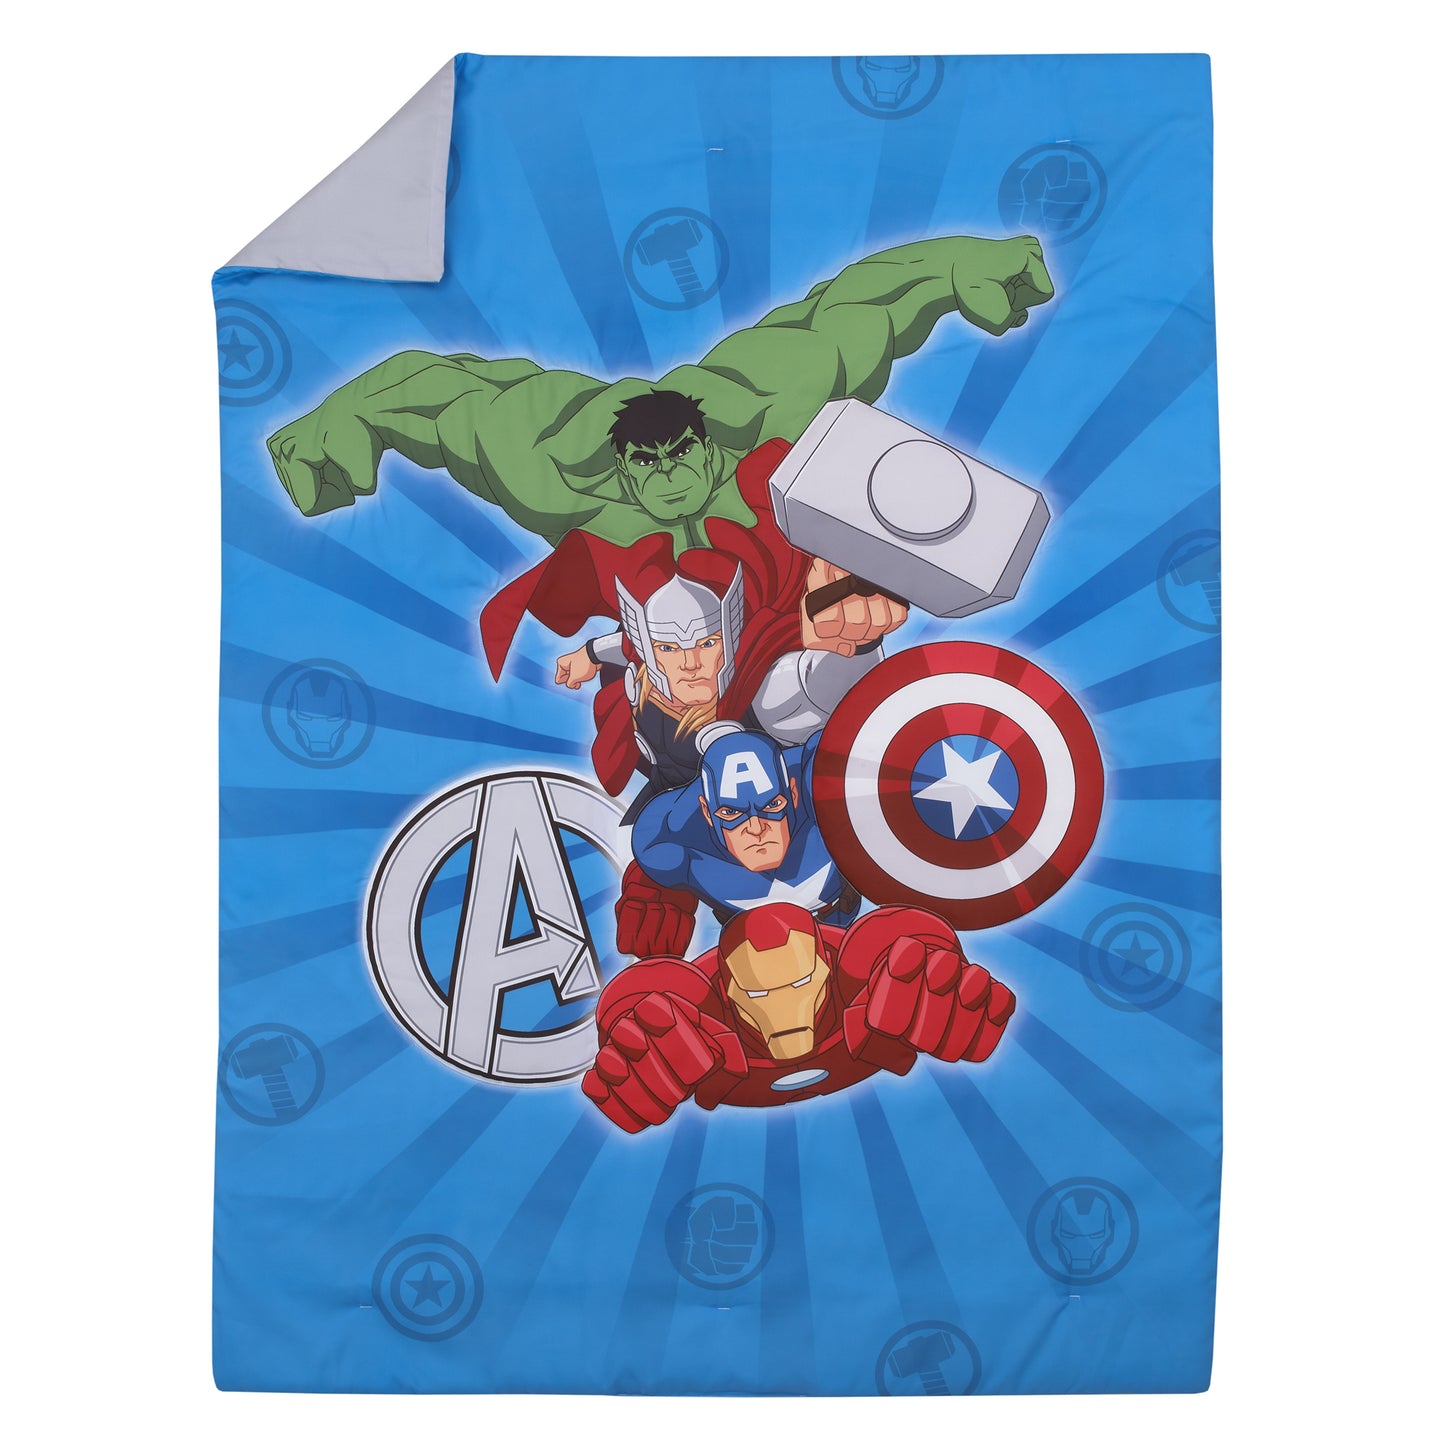 Marvel Avengers Team Blue, Red, and Green Hulk, Captain America, Iron Man, and Thor 4 Piece Toddler Bed Set - Comforter, Fitted Bottom Sheet, Flat Top Sheet, and Reversible Pillowcase